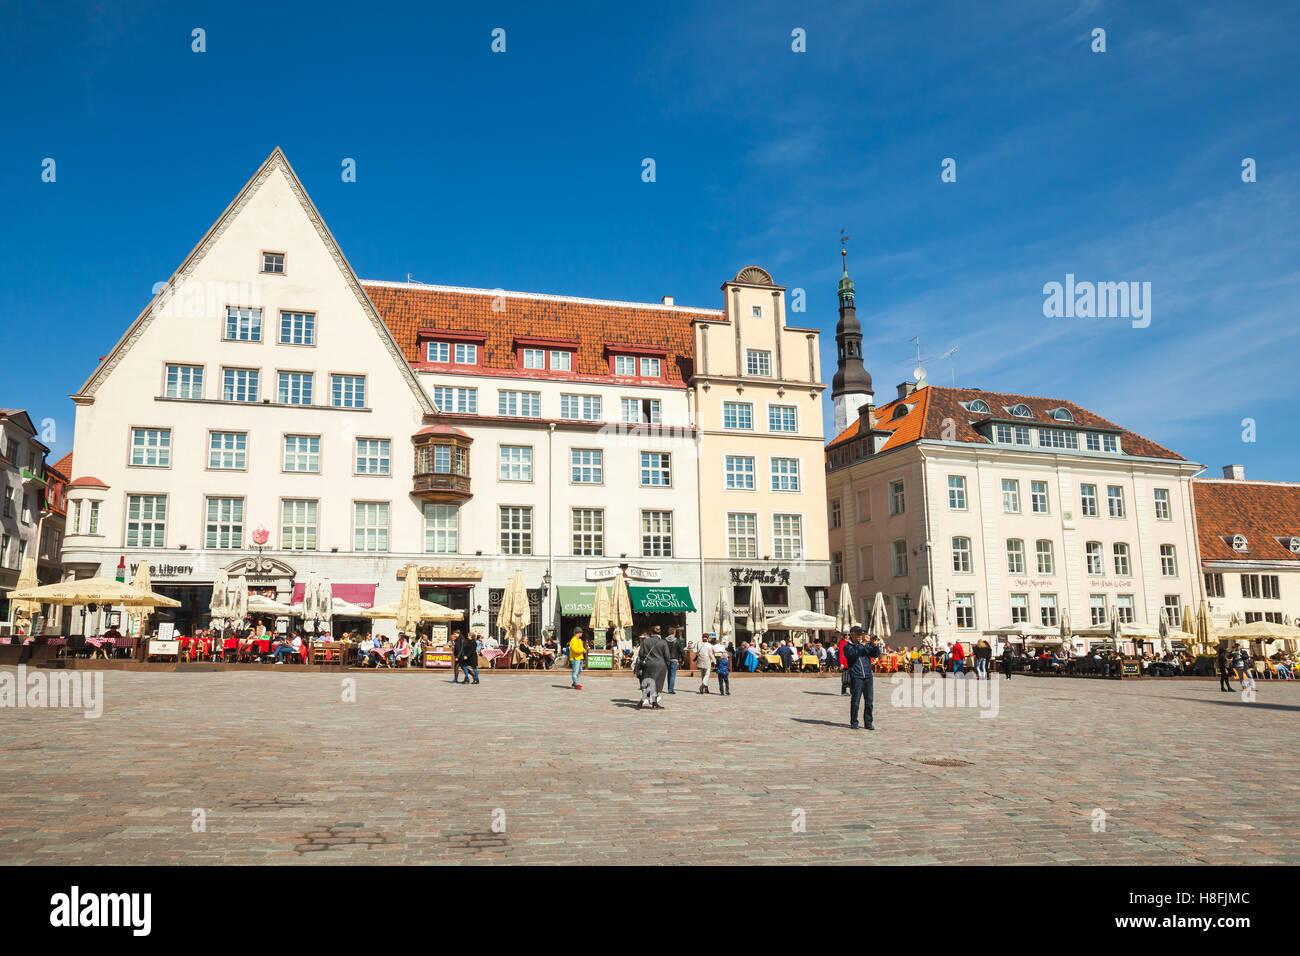 Tallinn, Estonia - May 2, 2016: Tourists and ordinary citizens are on Town Hall square in old Tallinn, bright spring sunny day Stock Photo